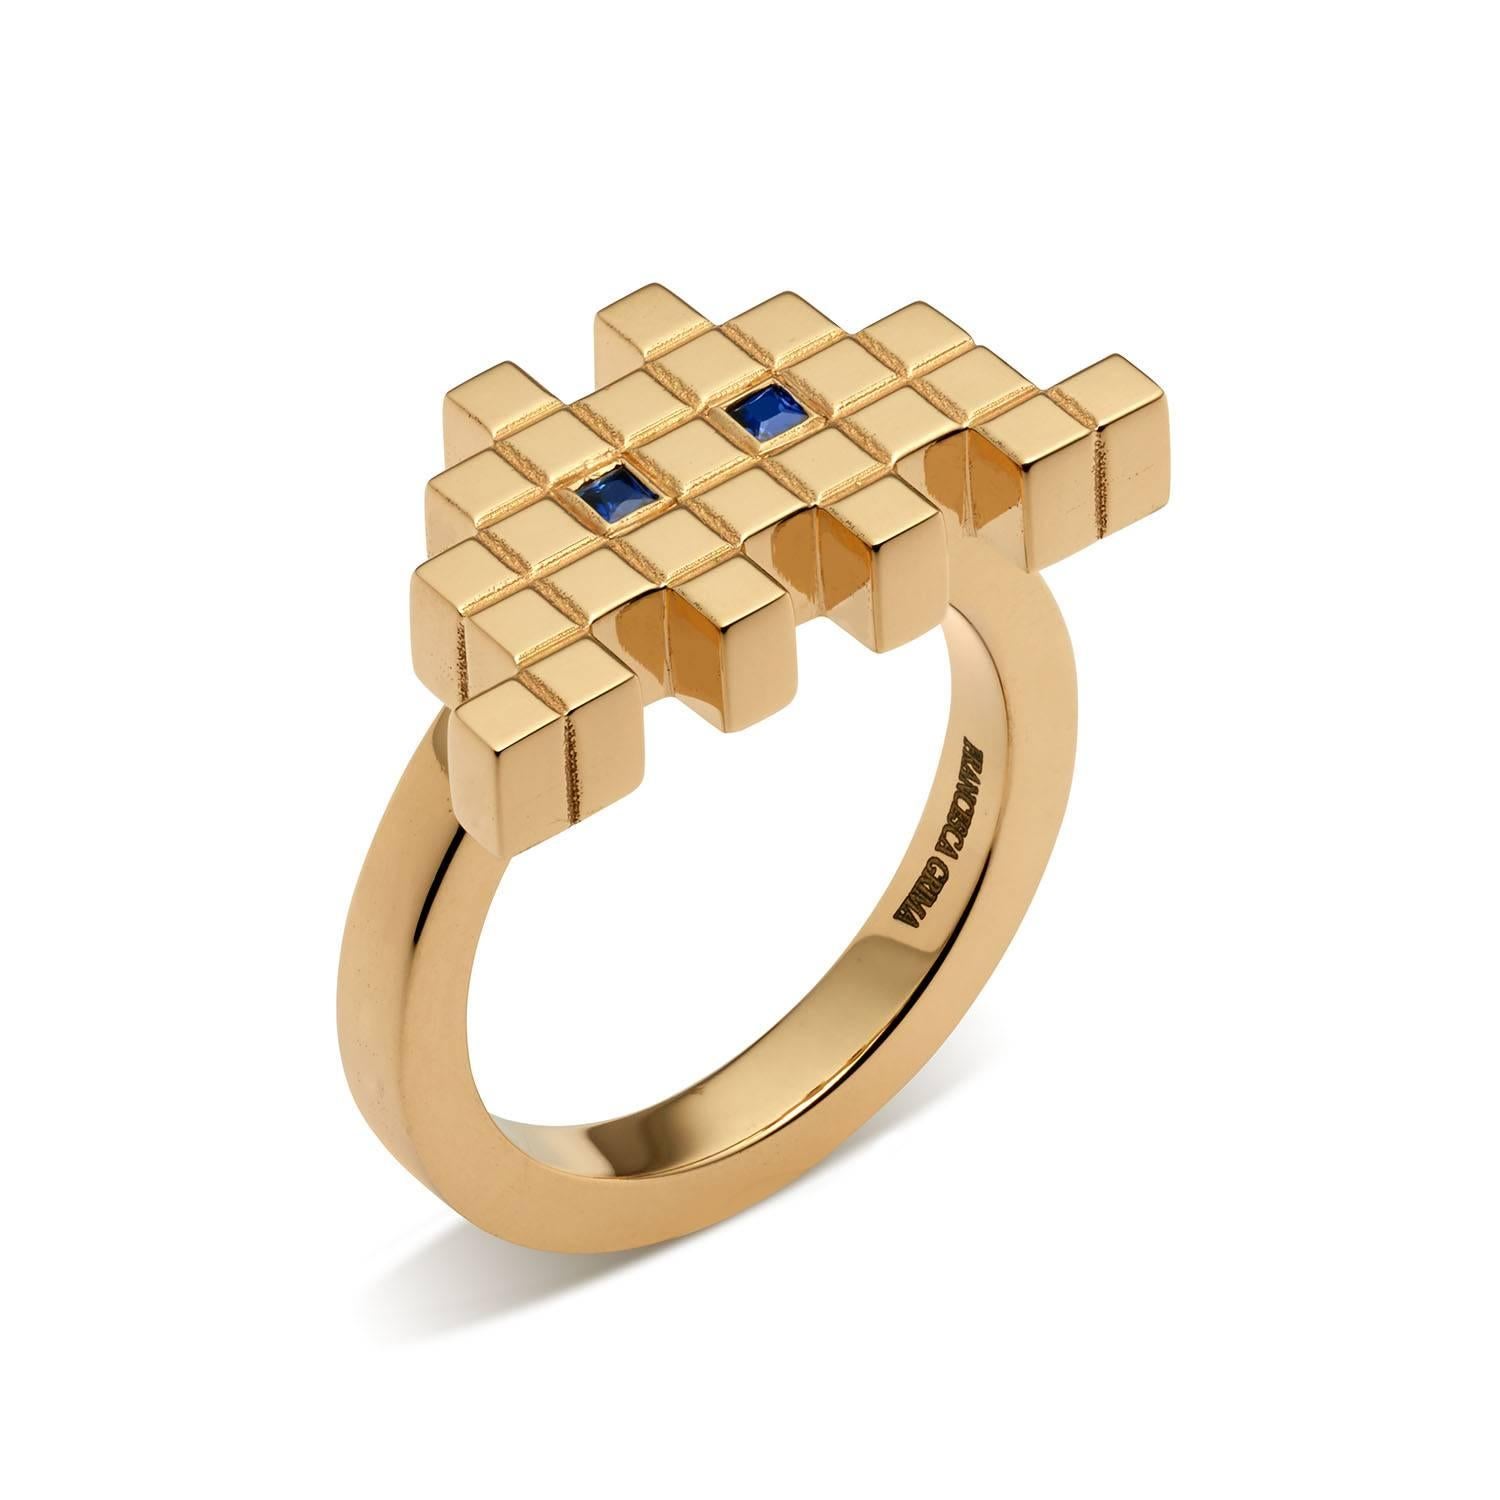 "Invader I" ring in yellow gold and sapphires by Francesca Grima 

・Polished 18ct. Yellow Gold
・Motif length 2cm
・Motif width 1cm
・2 Princess-cut Sapphires (0.07cts)

French Size 53  US Size 6 1/4  UK Size M

Signed Francesca Grima,